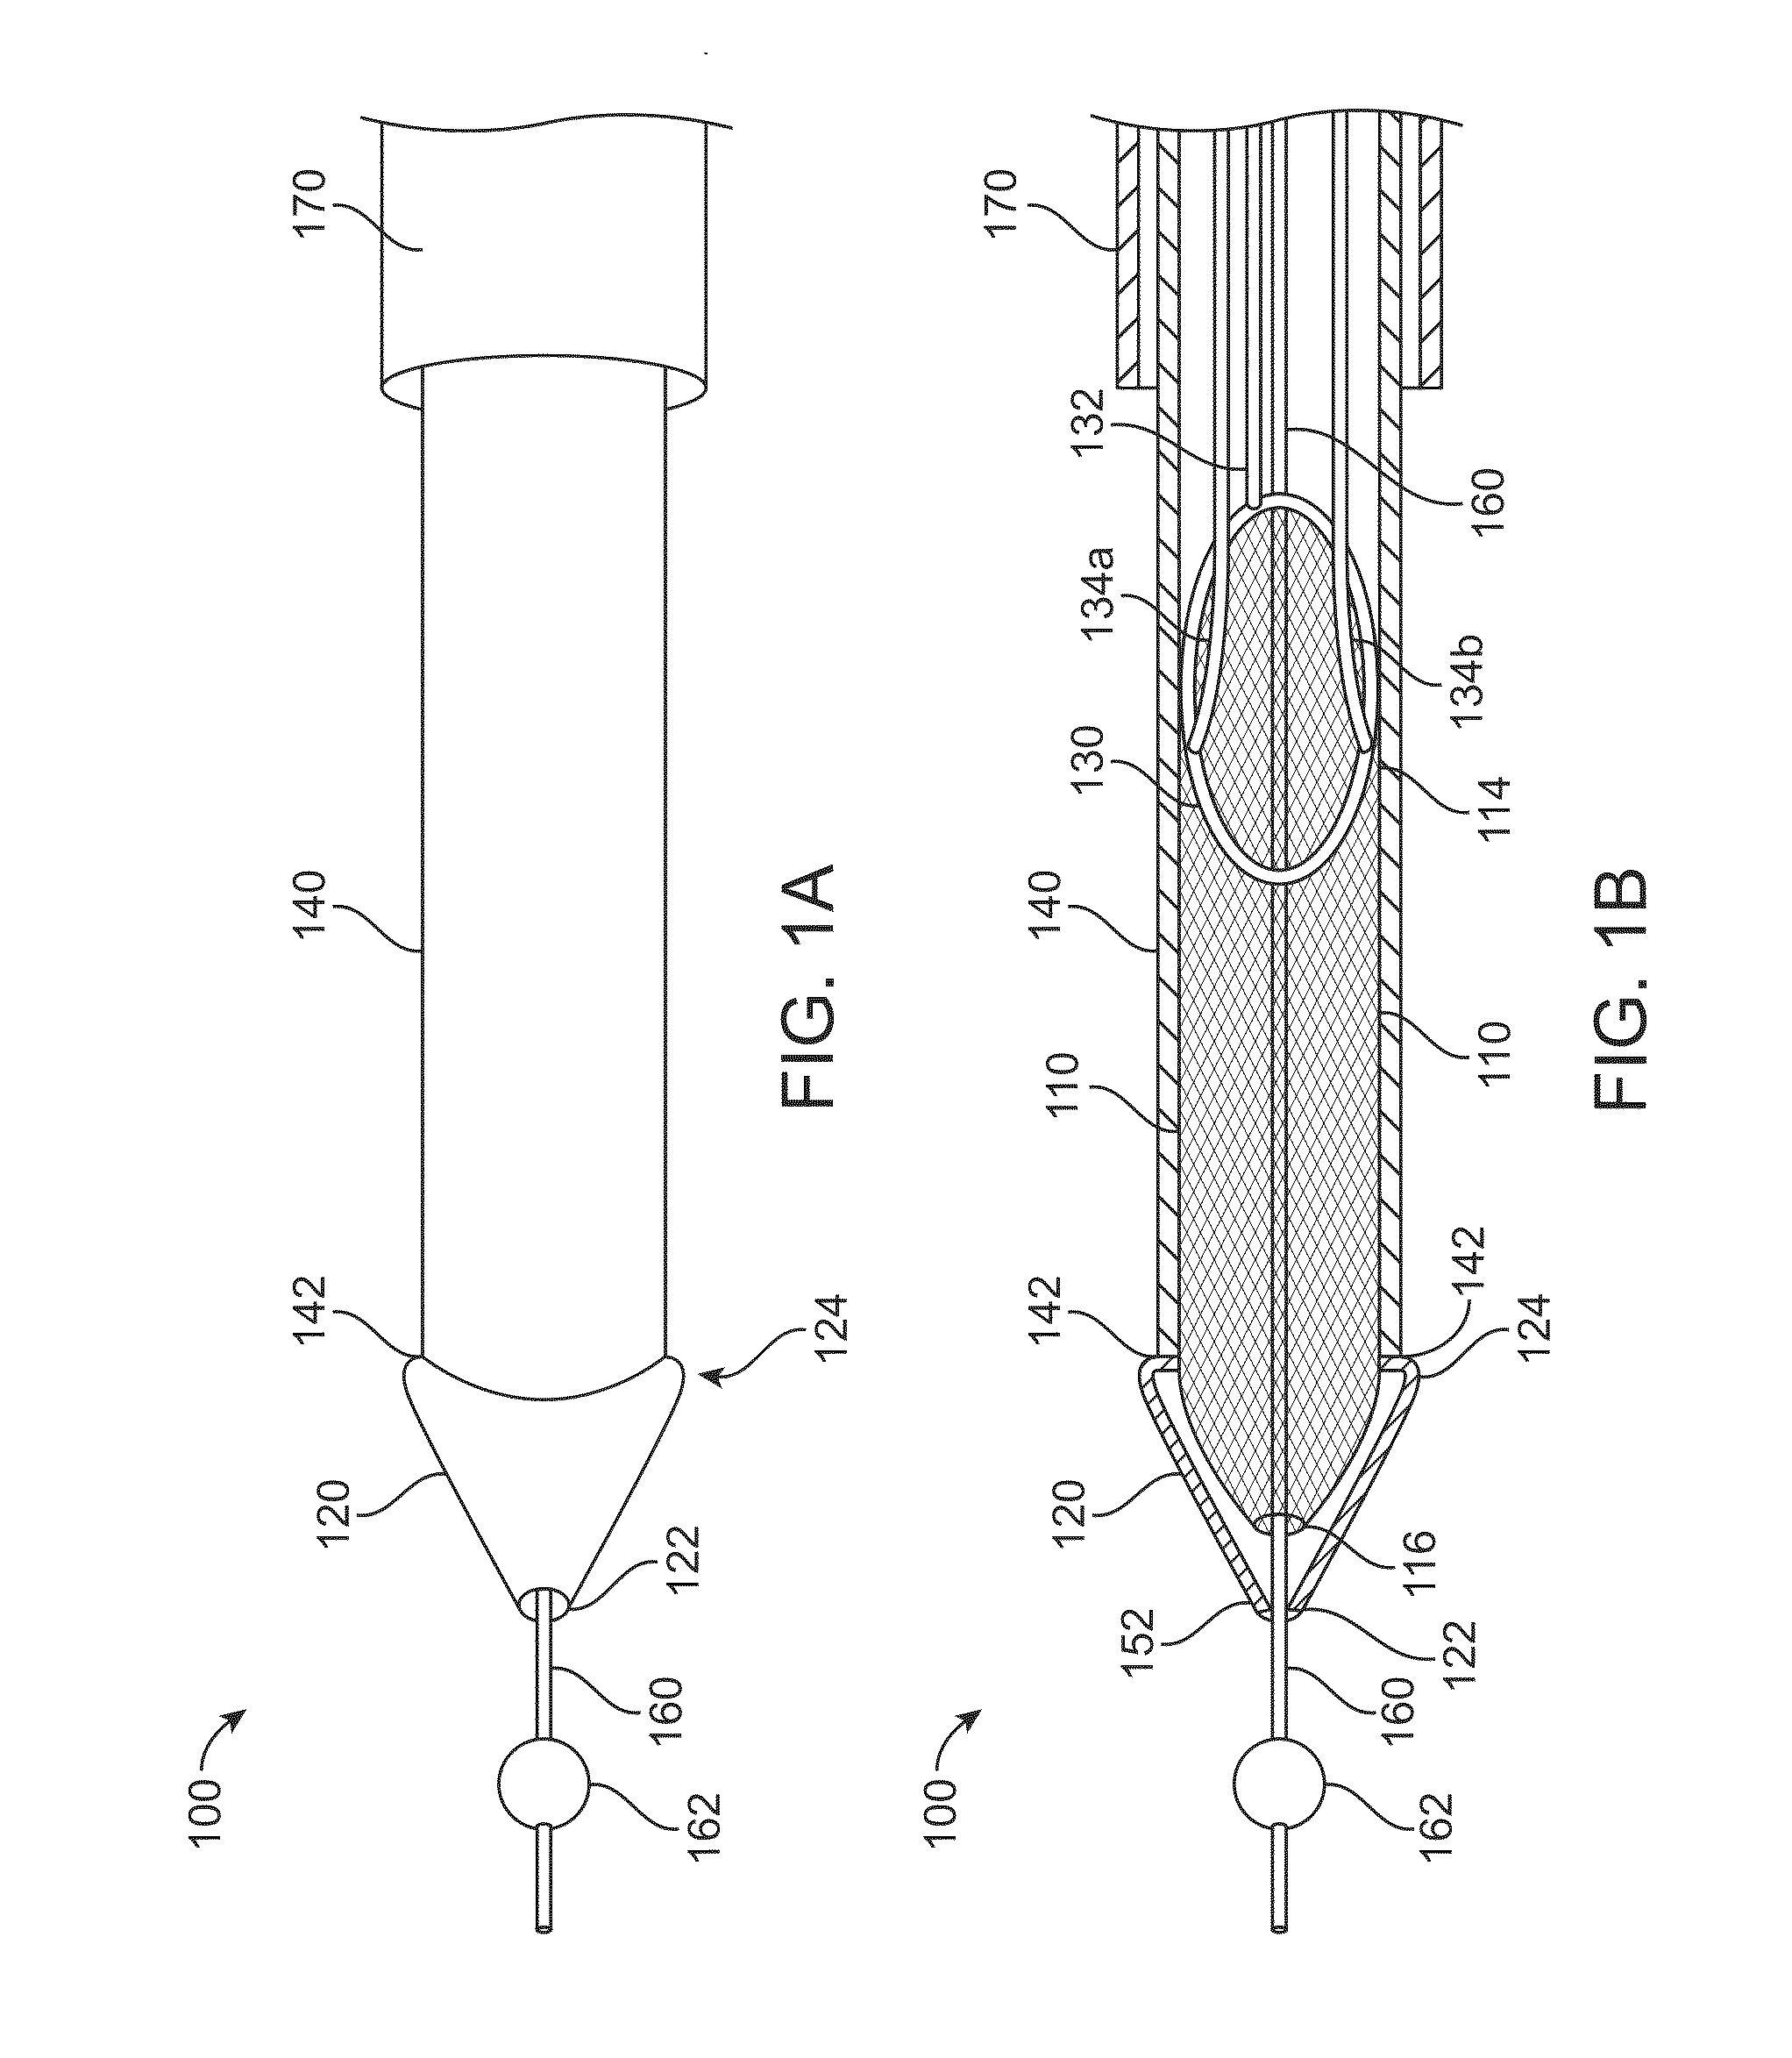 Thrombus removal and intravascular distal embolic protection device